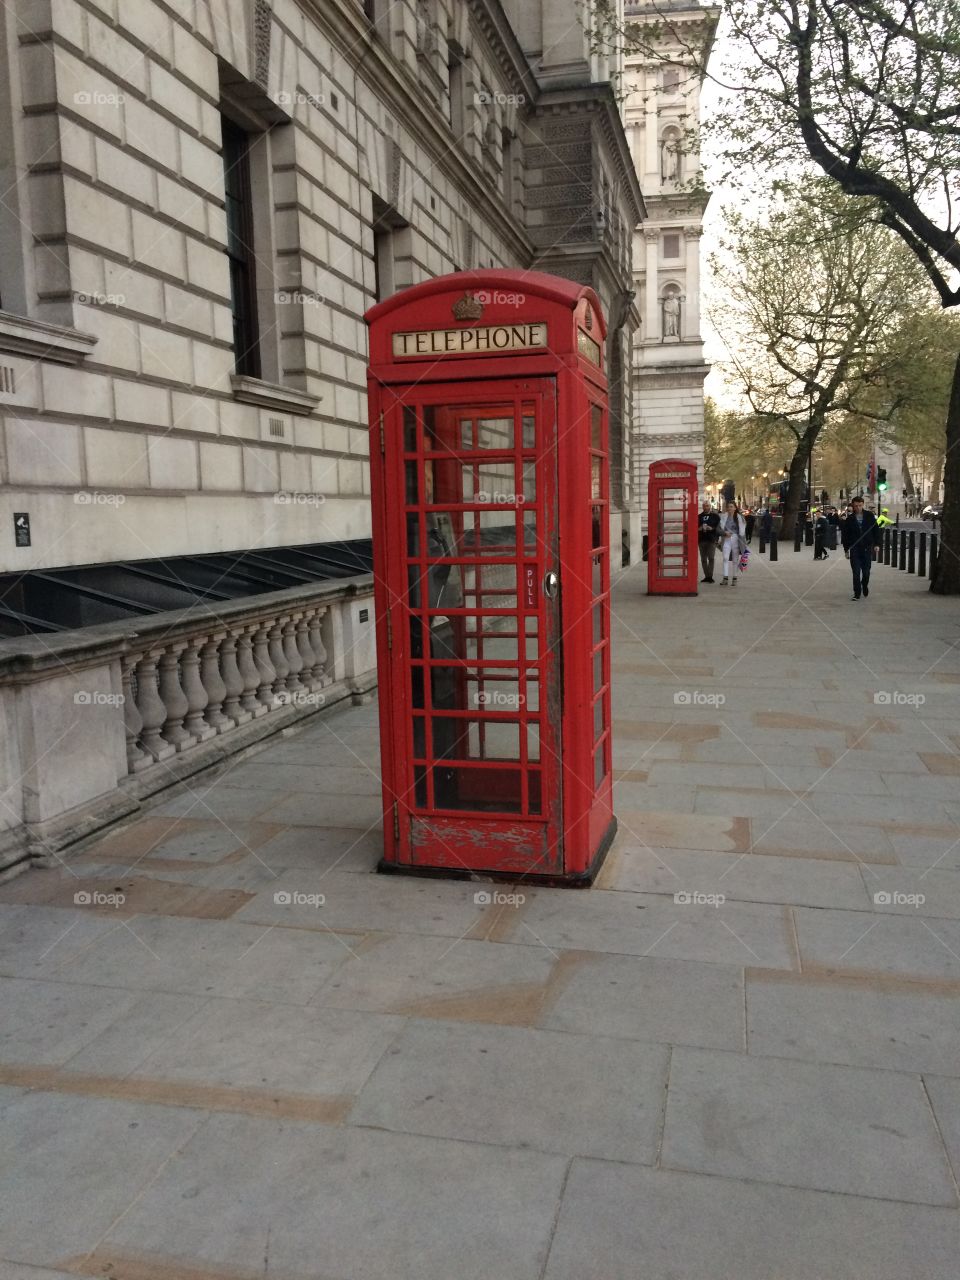 London's iconic red phone booth 